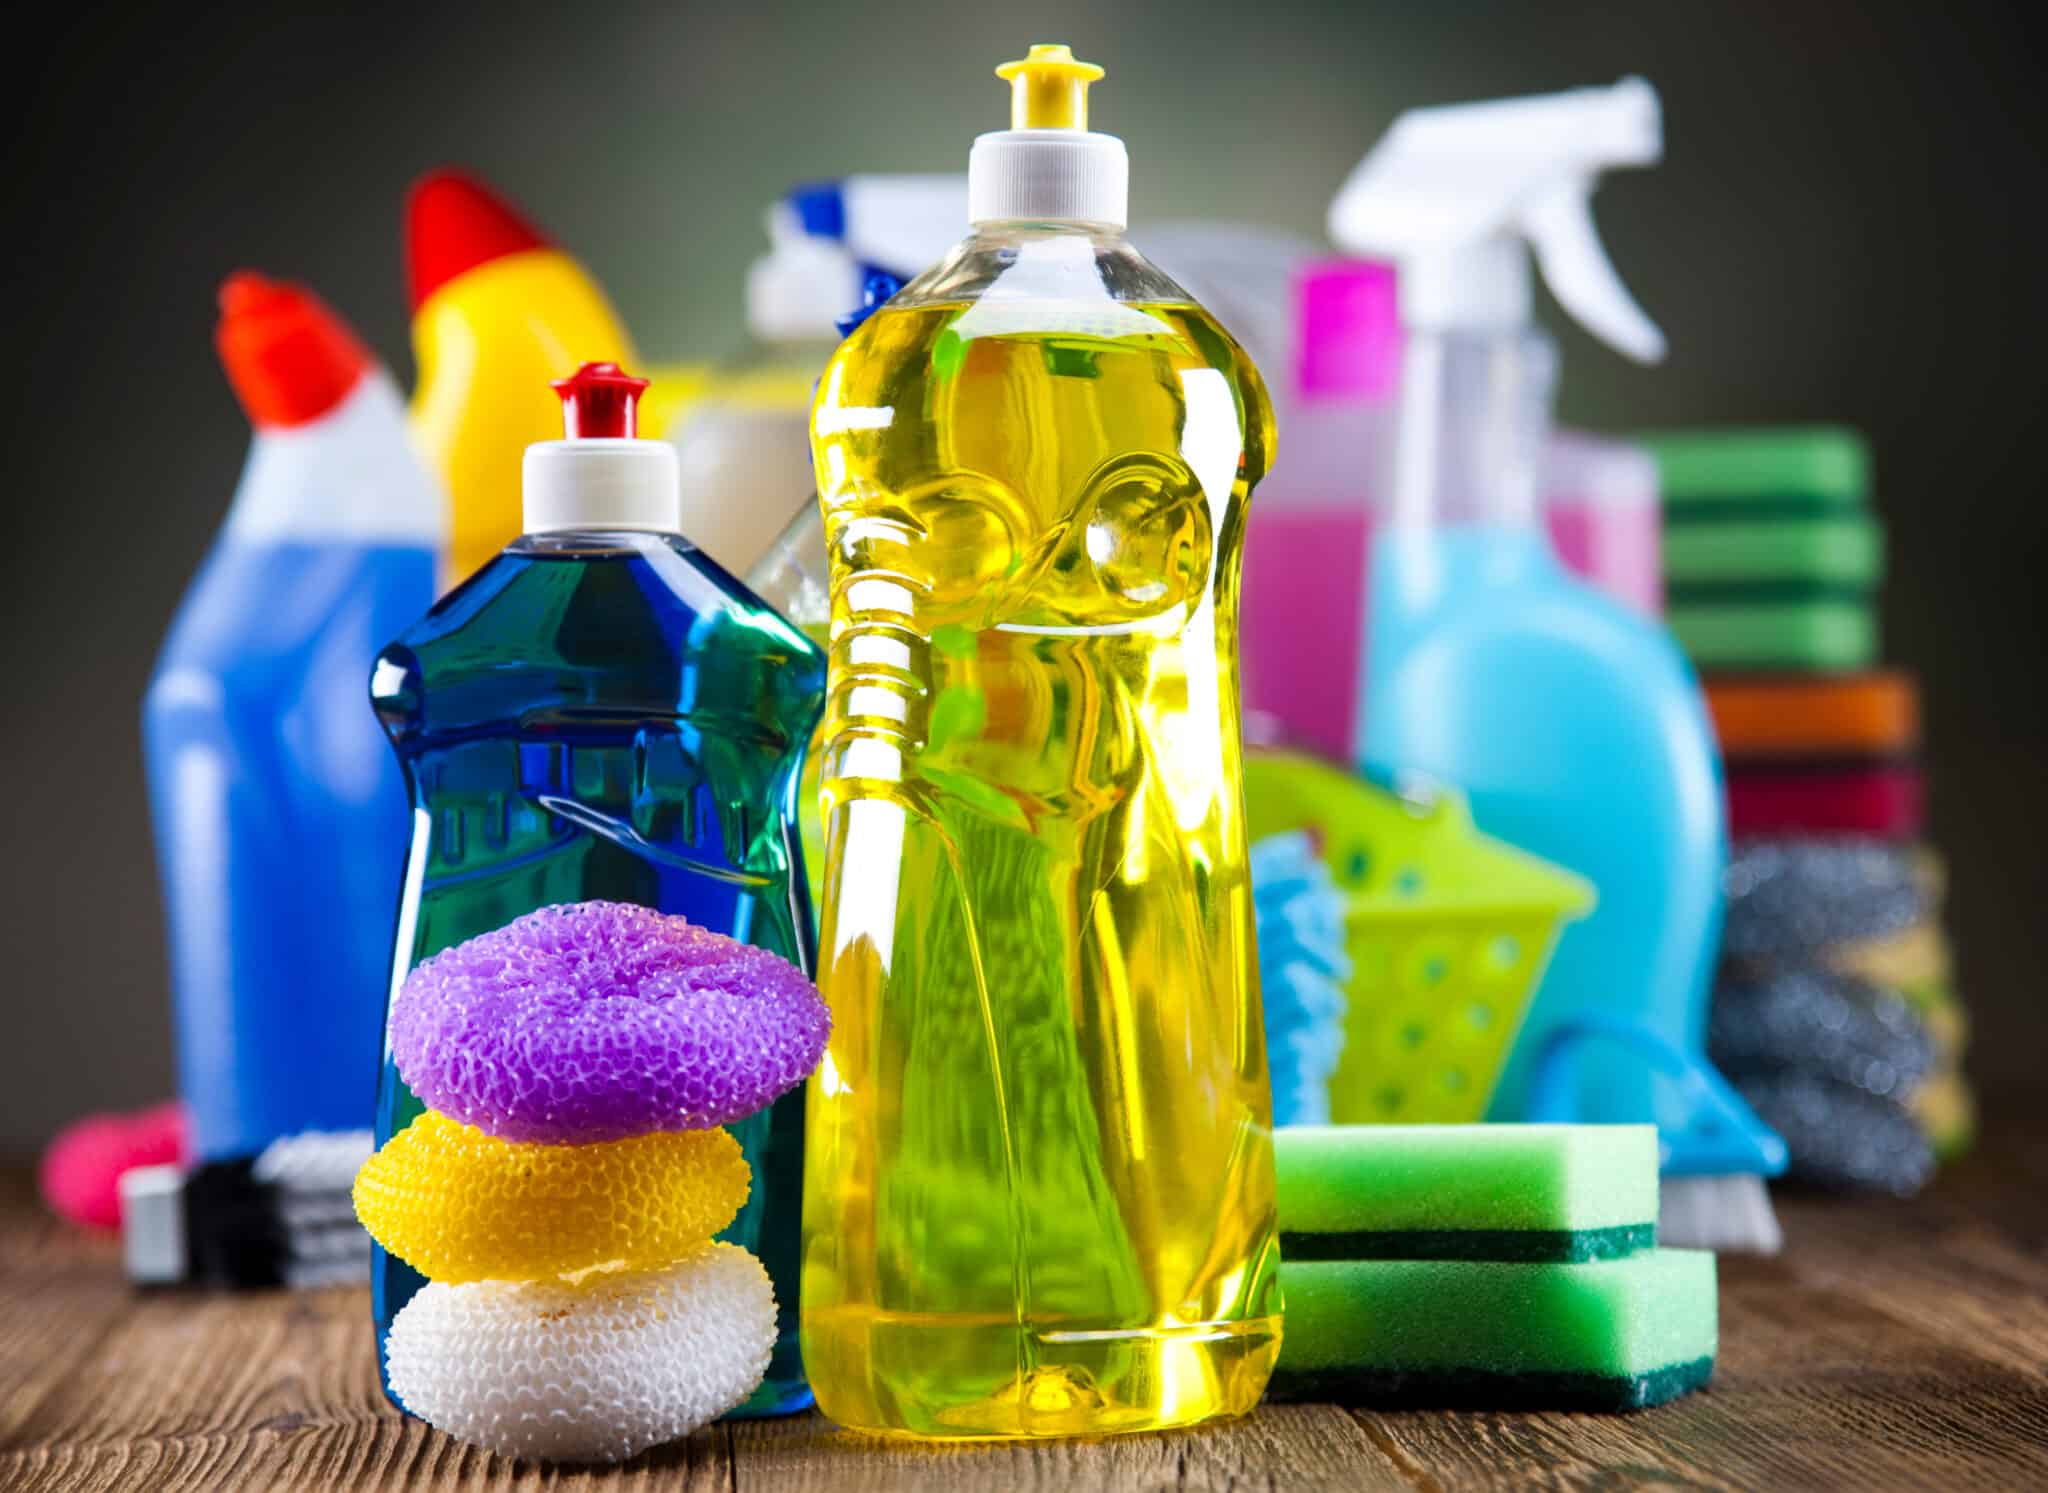 5 Reasons to Maintain Your Inventory of Cleaning Supplies - All